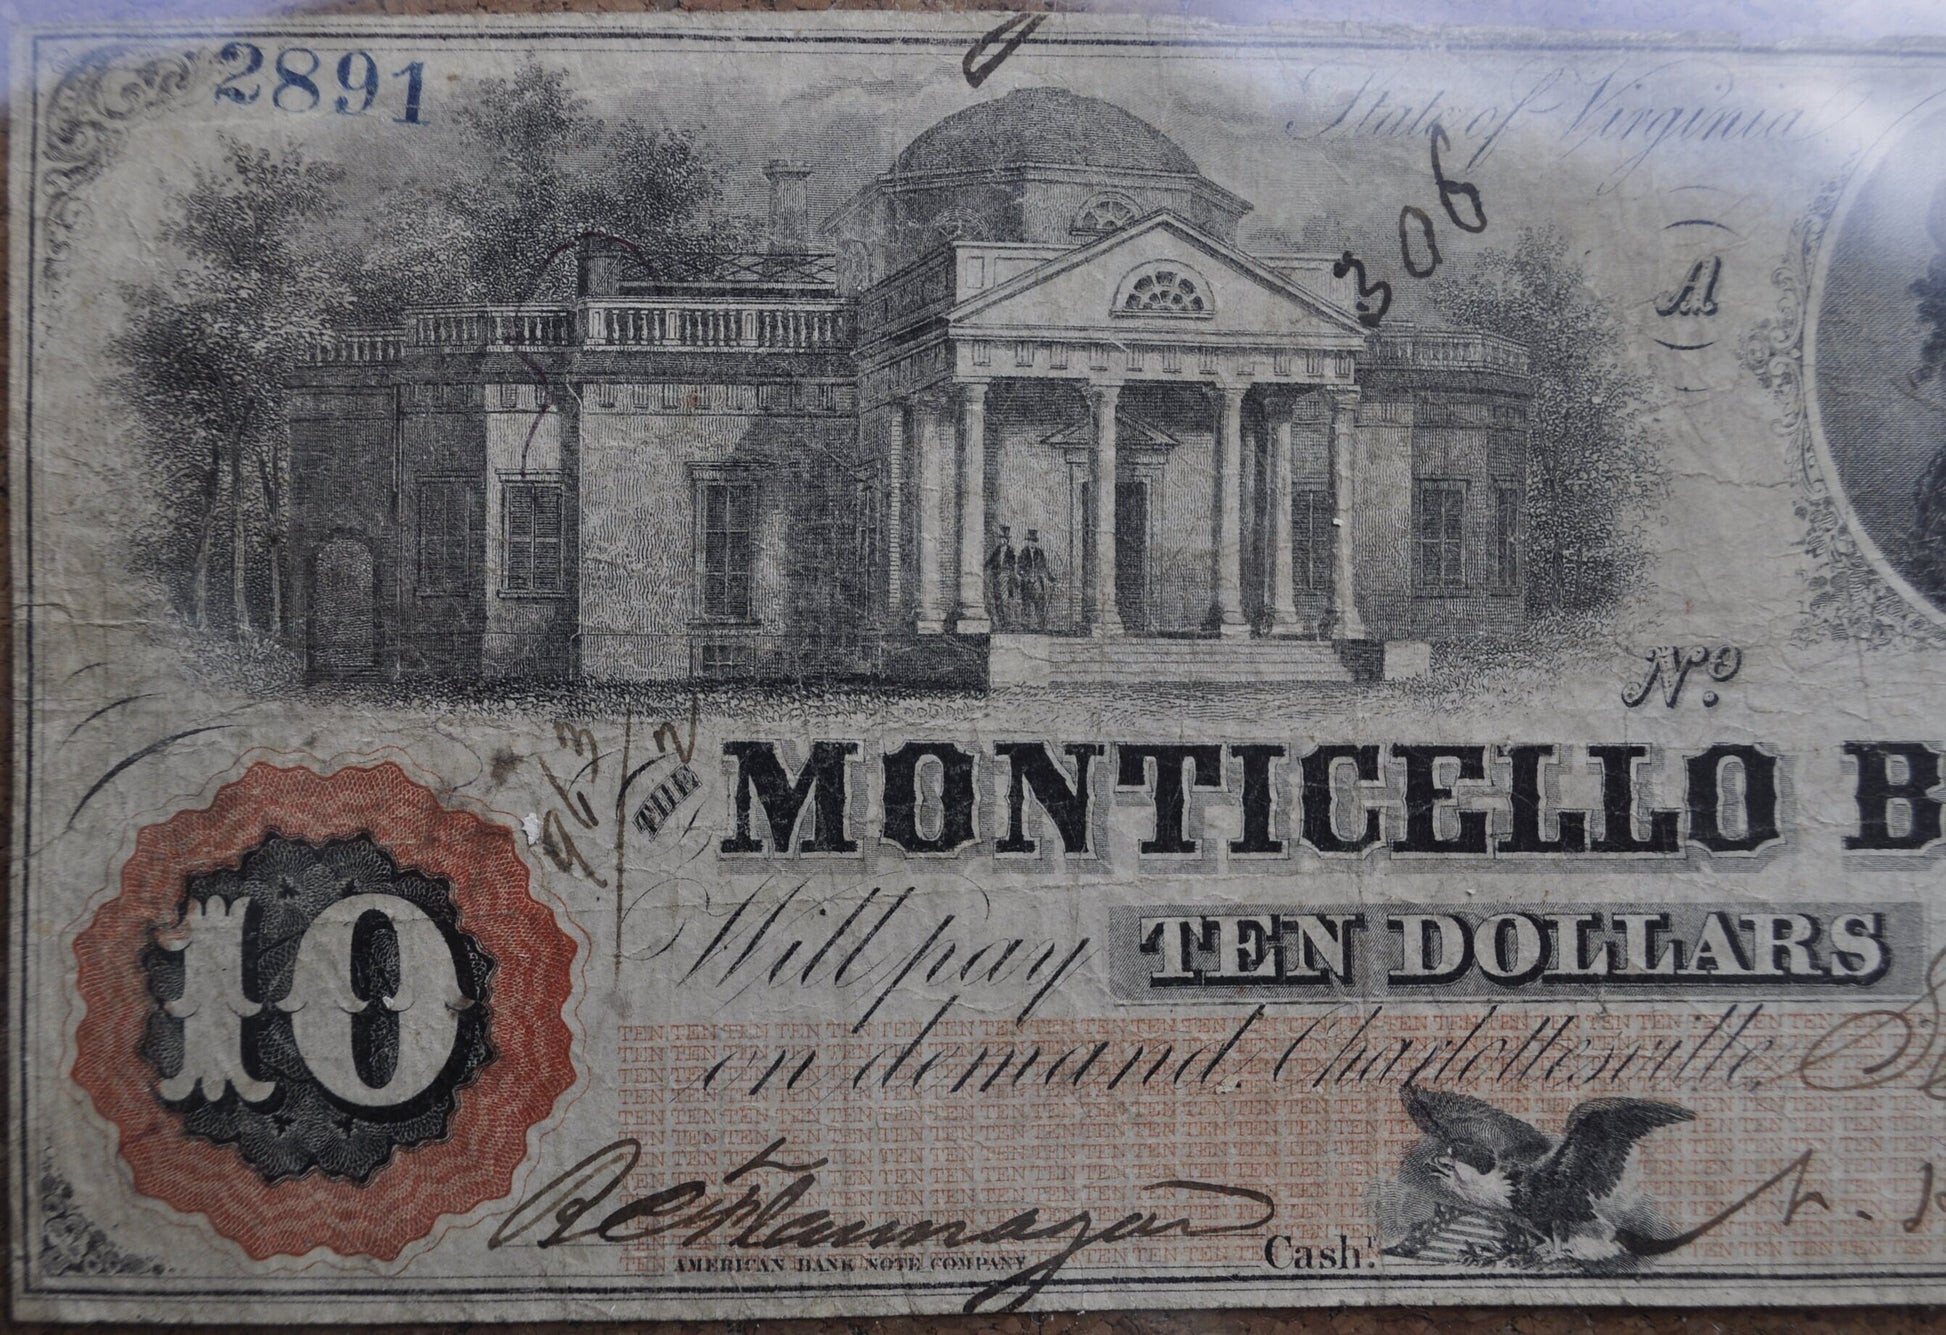 1860 Monticello Bank of Charlottesville Virginia 10 Dollar Paper Banknote - Very Rare and in Very Fine Condition - Obsolete Currency